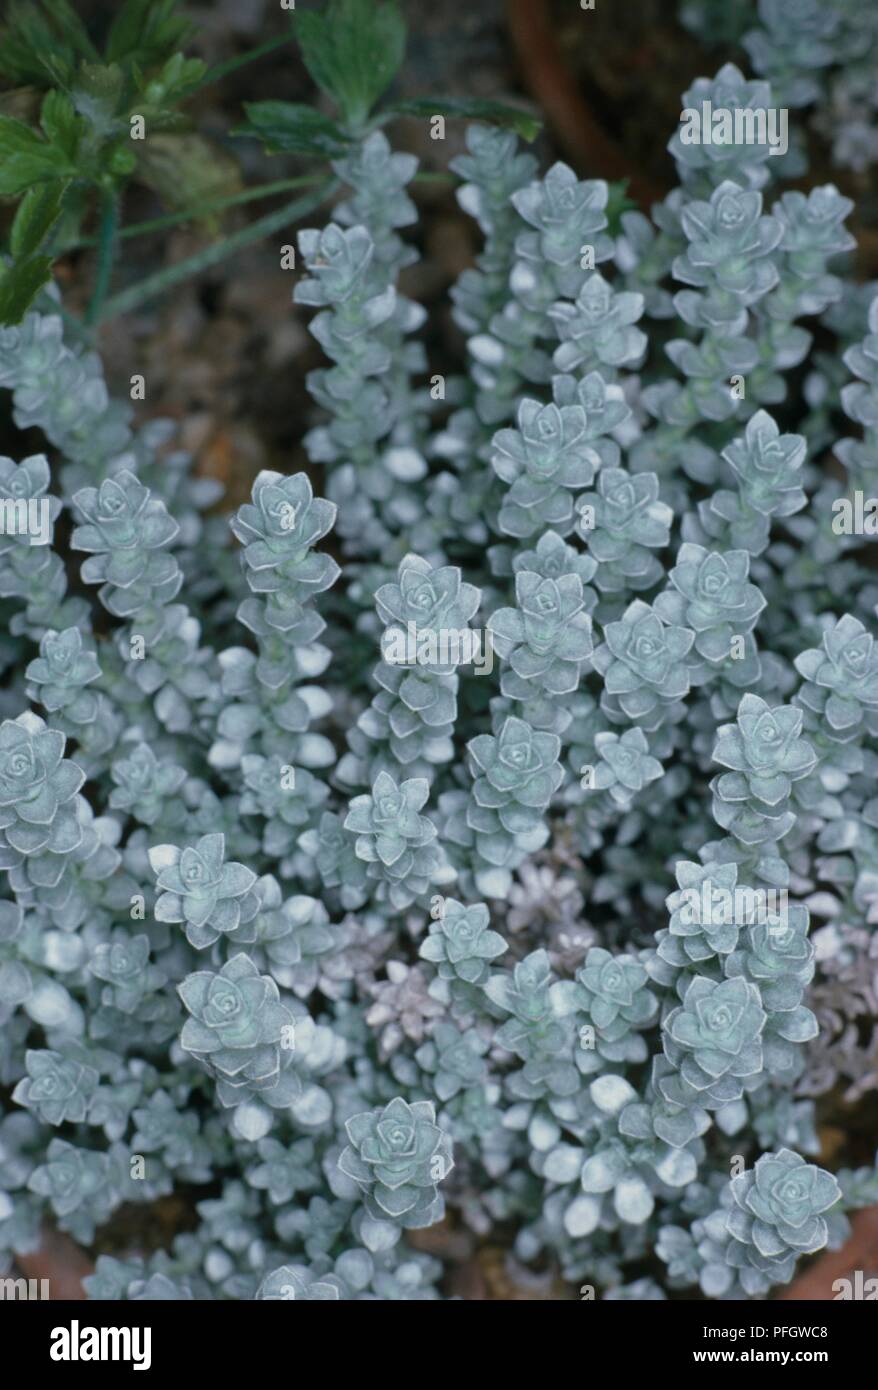 Leucogenes grandiceps (New Zealand Edelweiss) with abundance of silver-grey leaves on upright stems Stock Photo